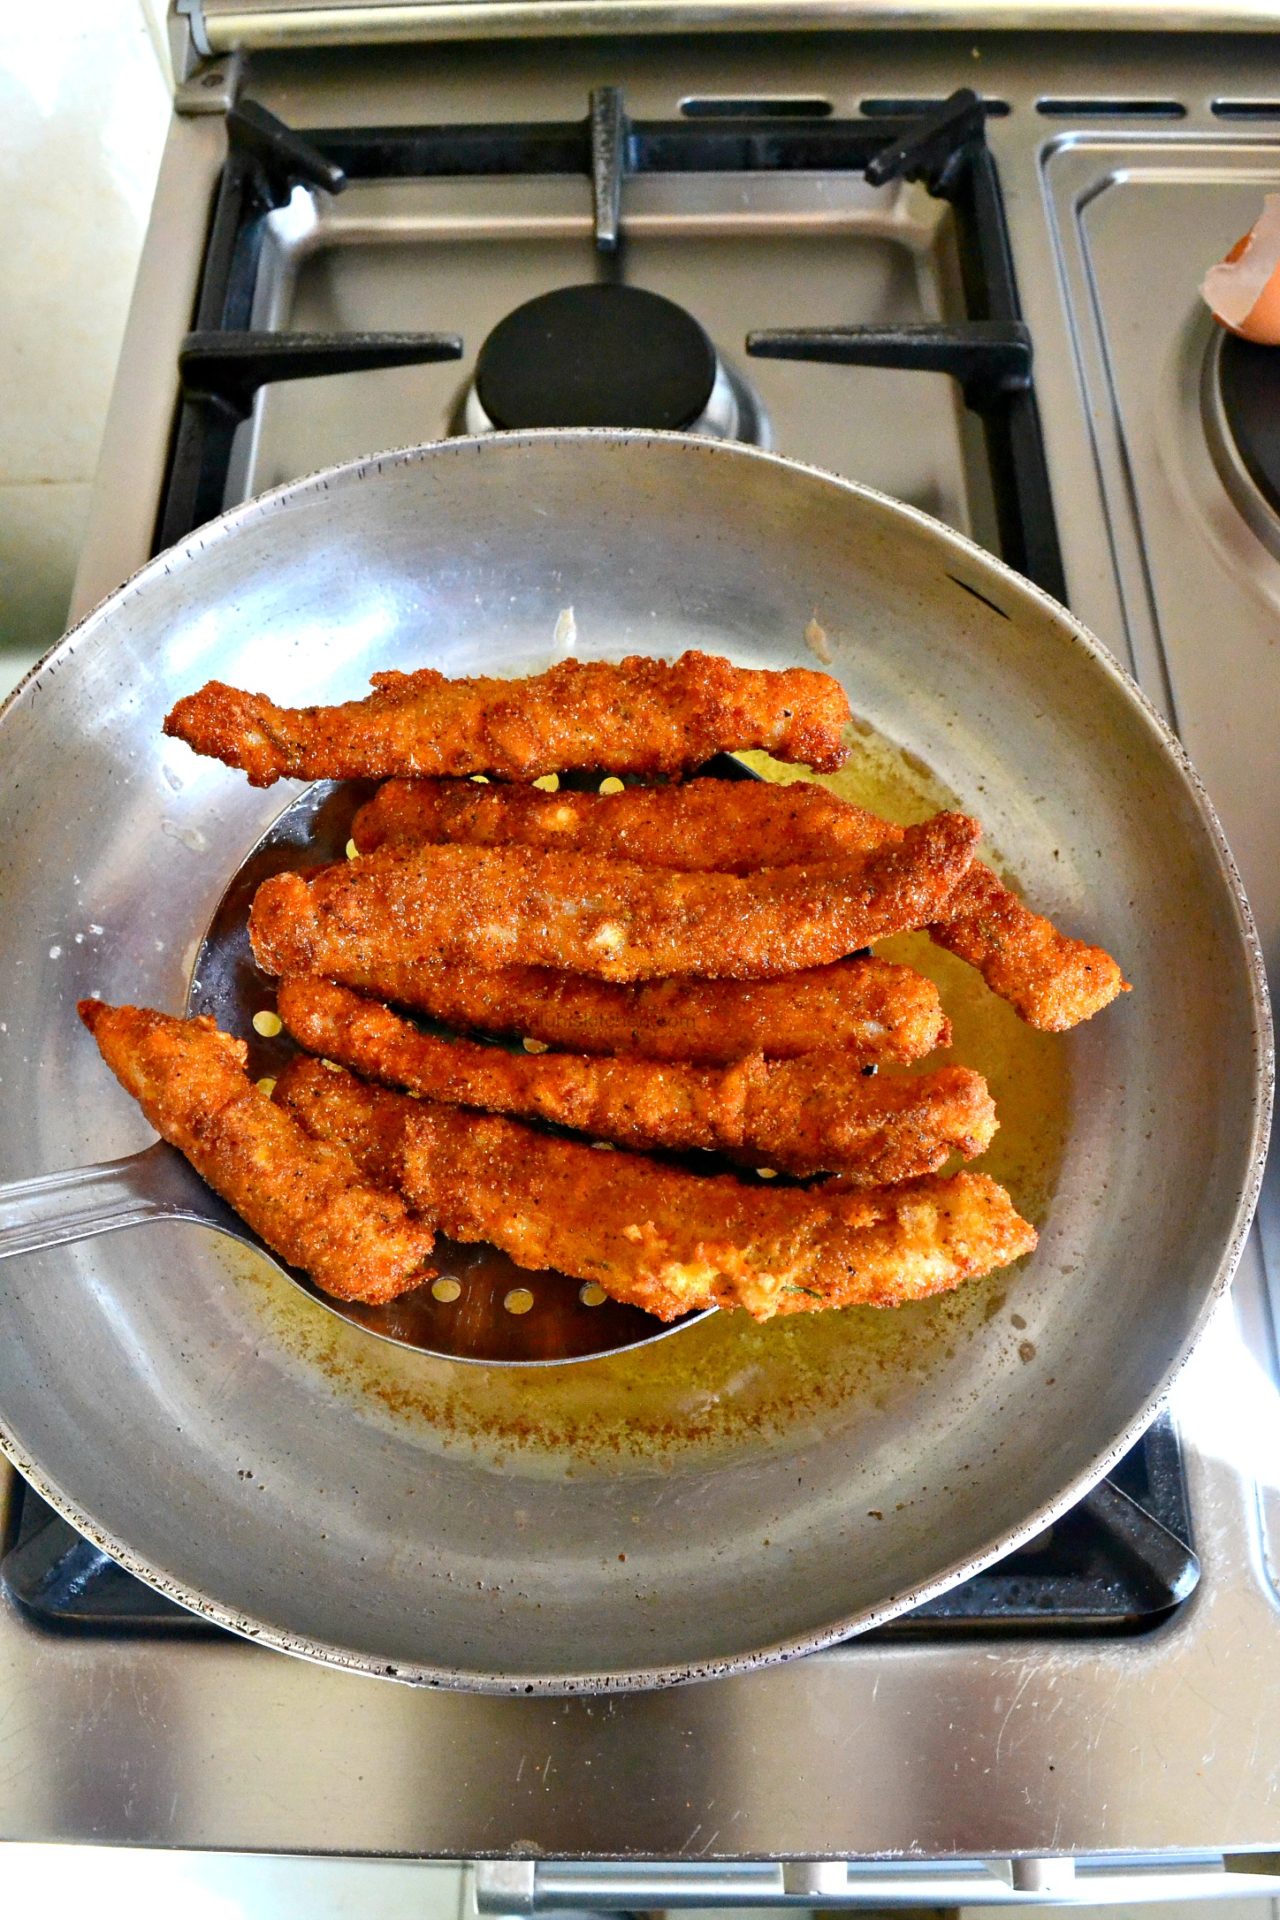 garlic and rosemary fish fingers_fry them for about 4 minutes and they should be cooked through_kaluhiskitchen.com